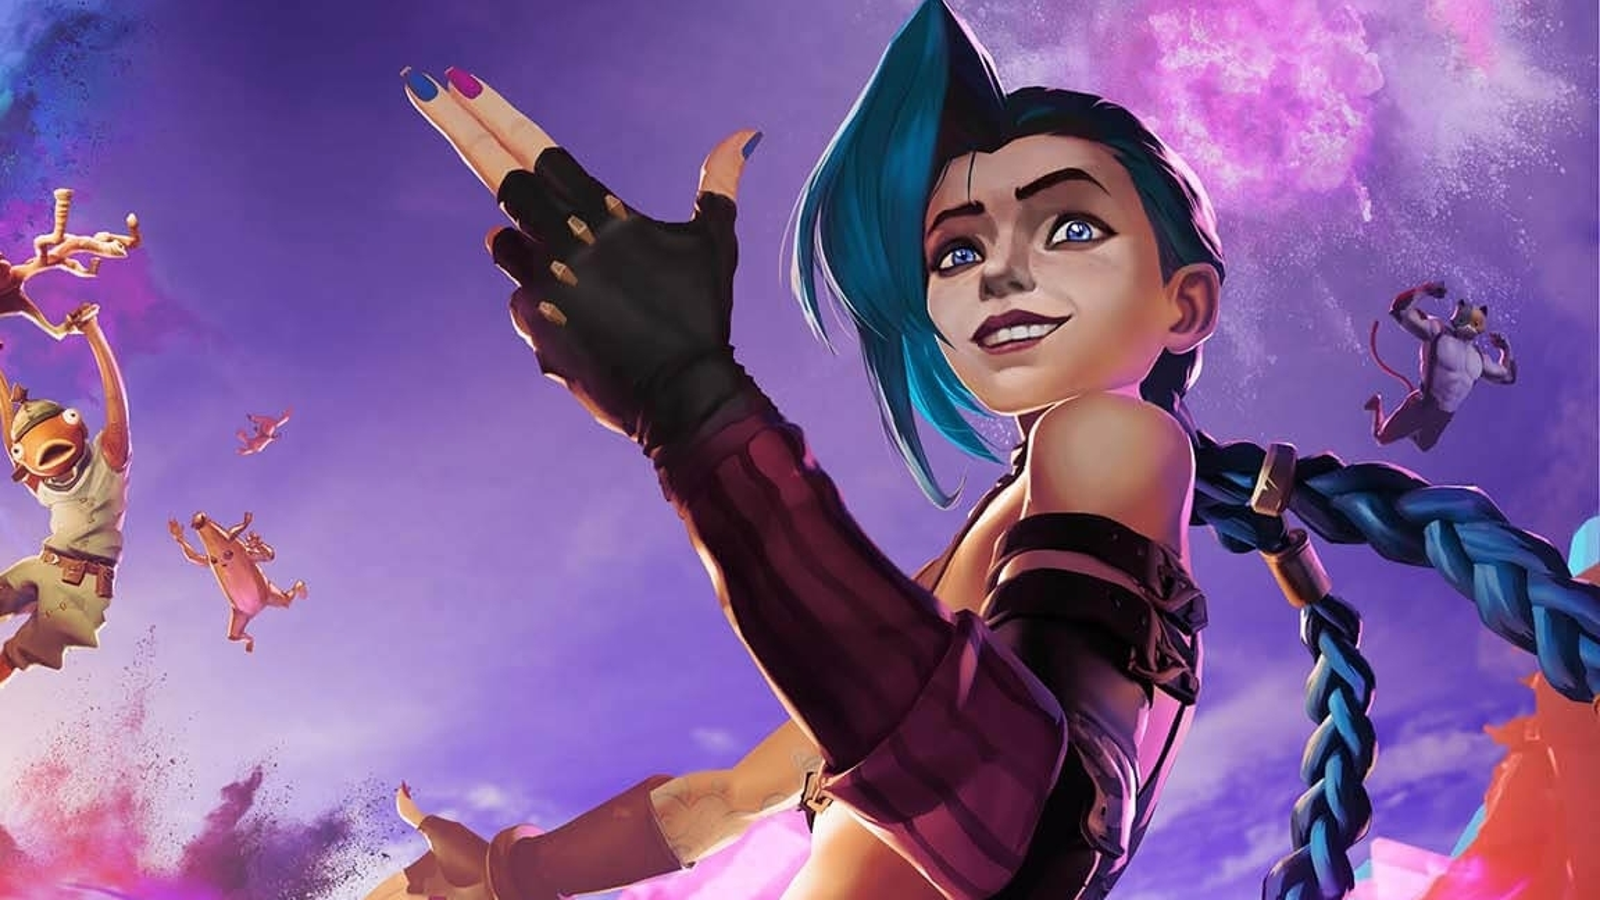 NEW Arcane Jinx Skin in Fortnite! (League of Legends Collaboration